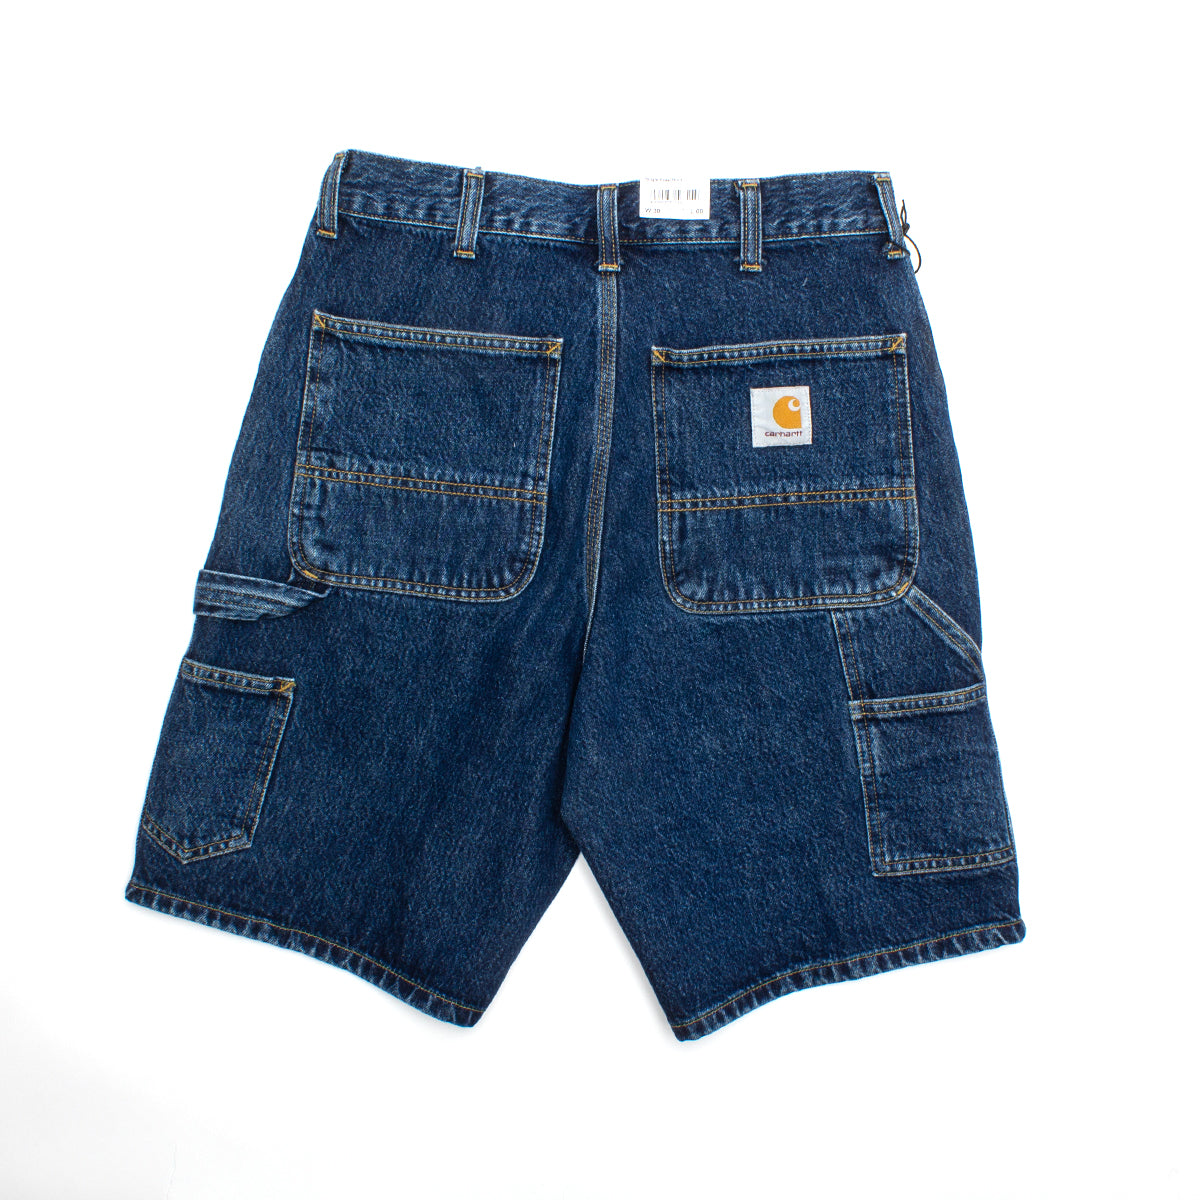 Carhartt WIP | Single Knee Short Style # I032026-0106 Color : Blue (Stone Washed)